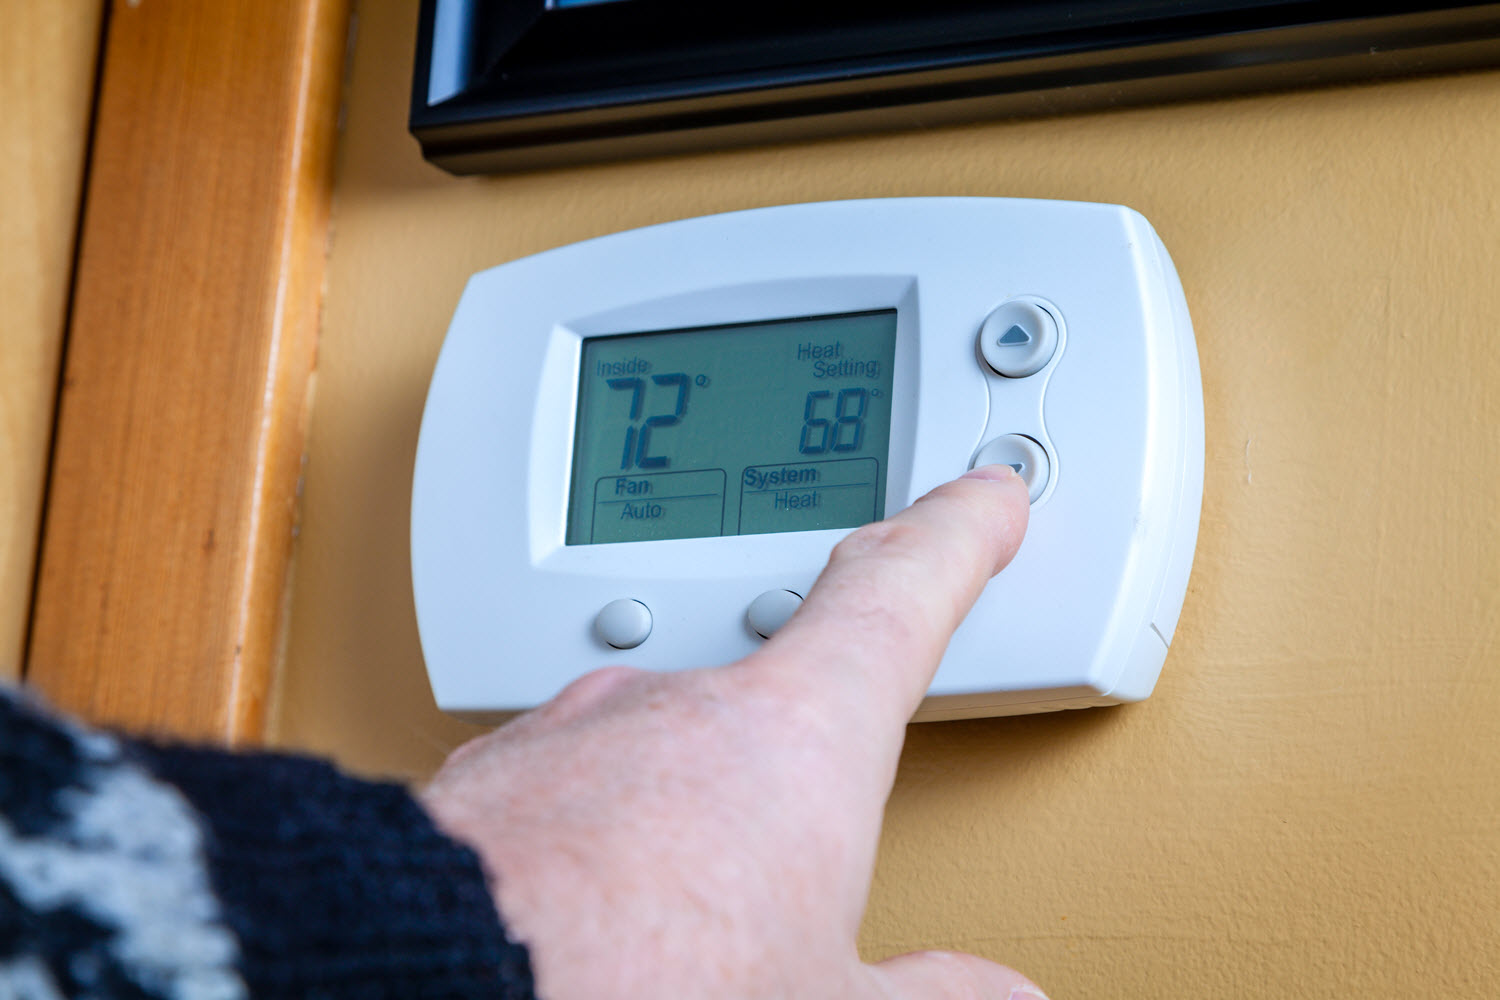 Hand lowering the temperature on a wall-mounted thermostat